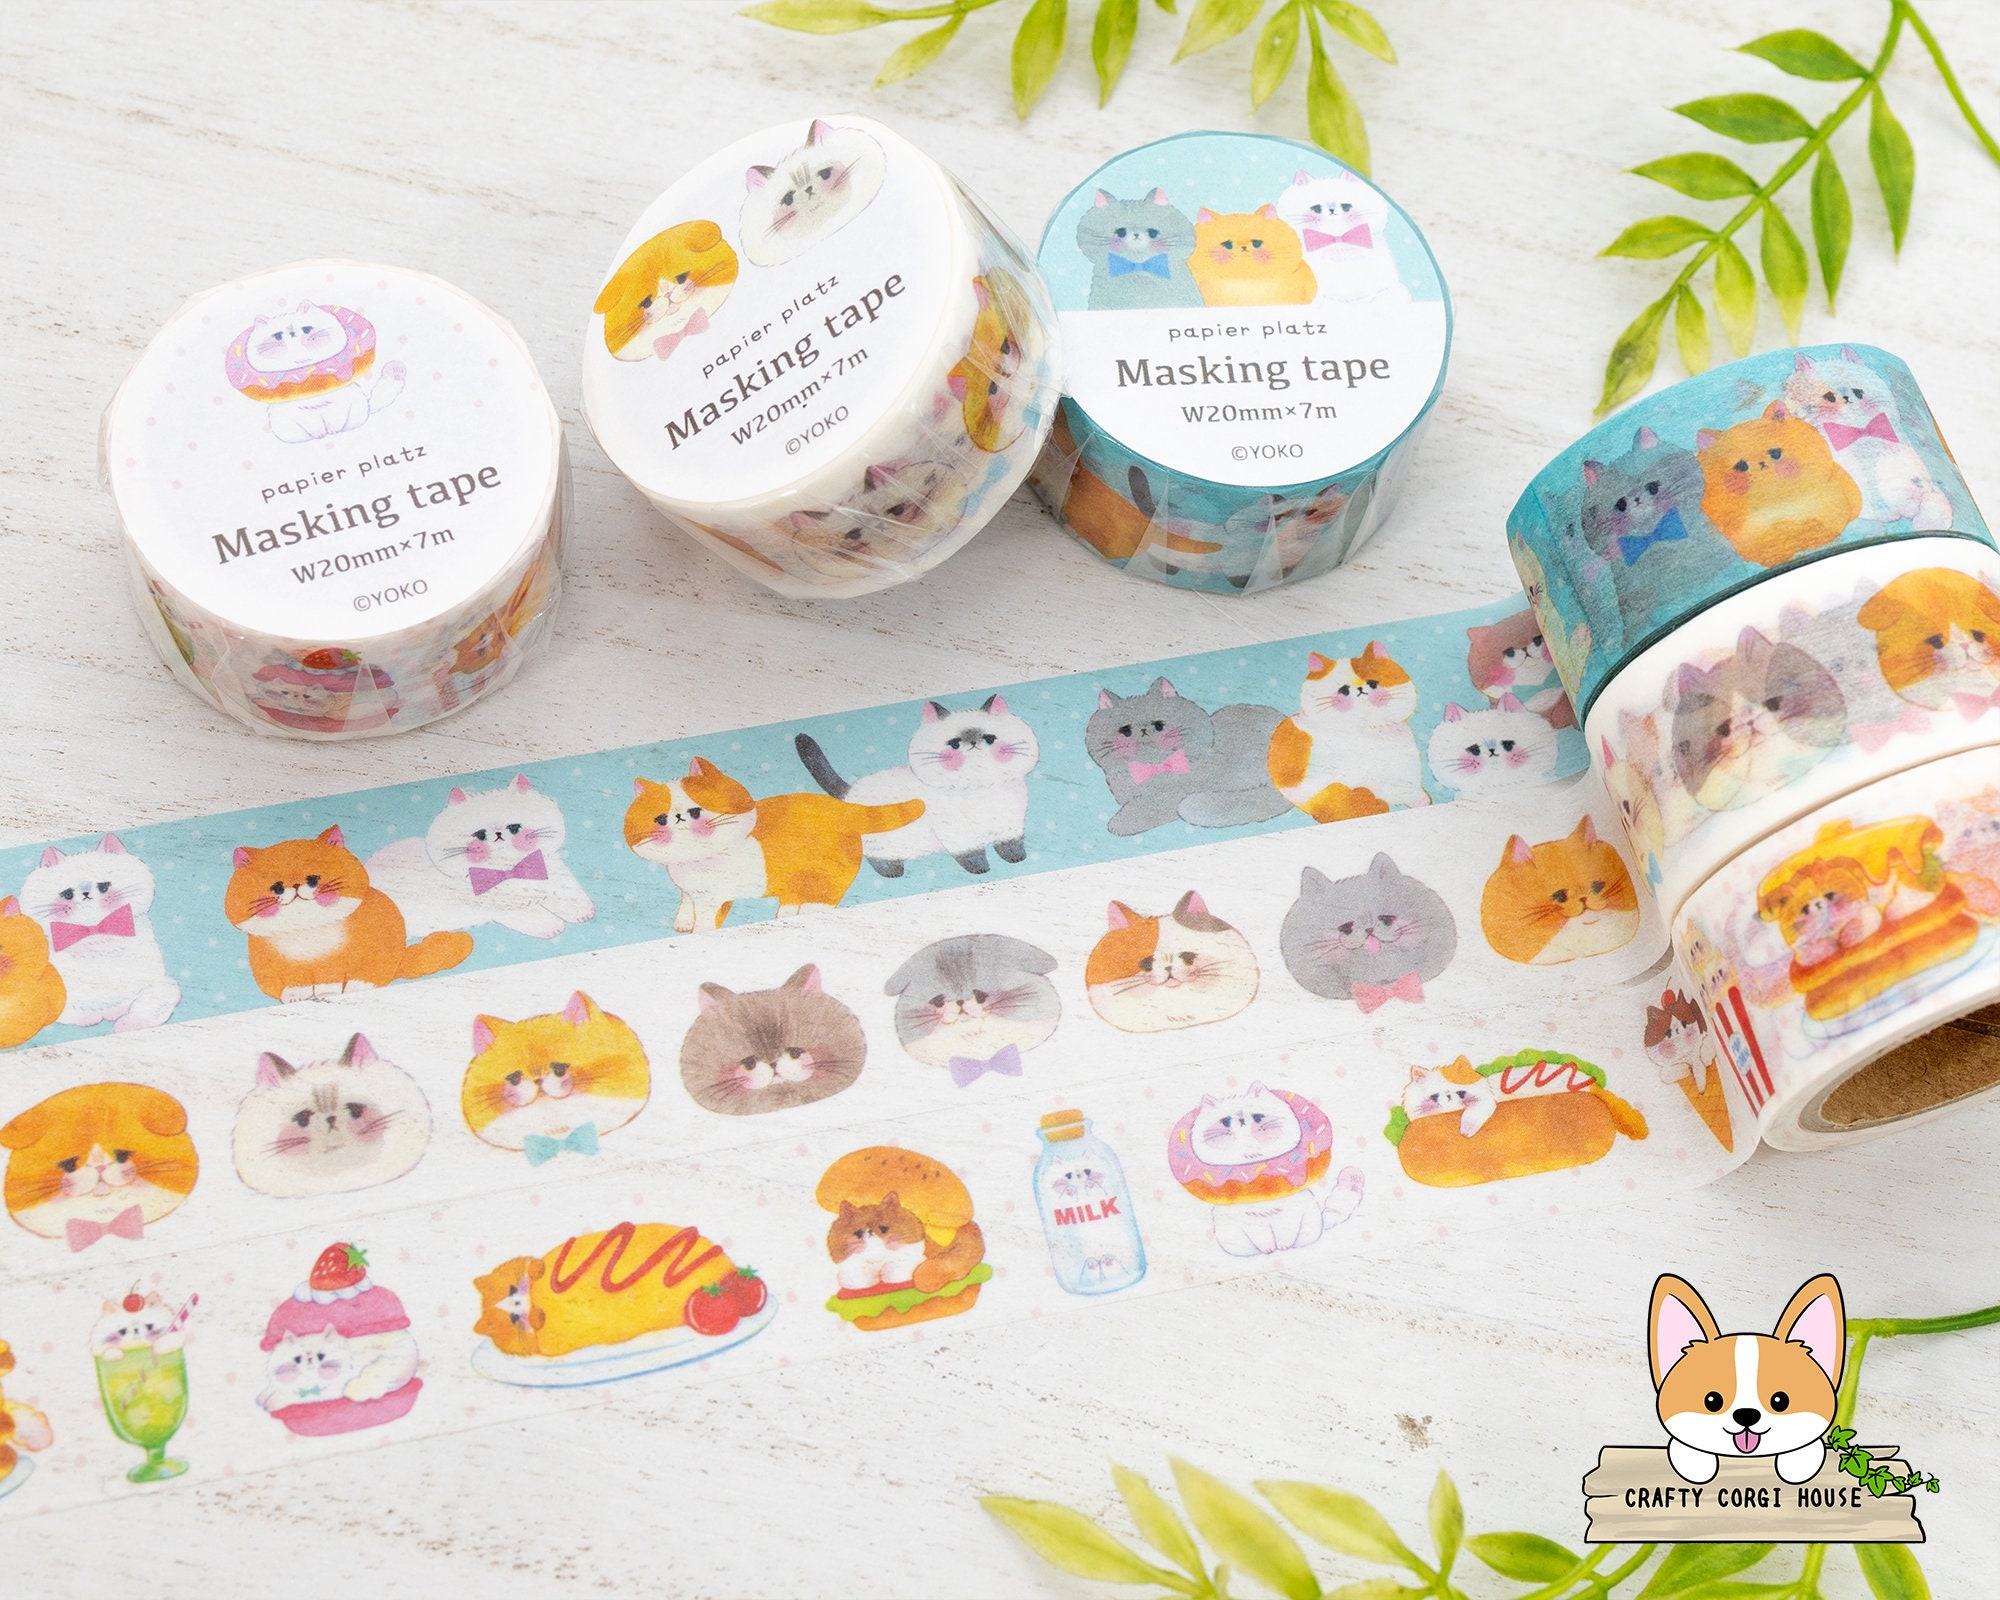 Kawaii Cat Paw Double Sided Tape Scrapbooking Tape, Double Side Tape, Glue  Tape, Paper Craft Supplies, Adhesive Tape for Arts and Crafts 